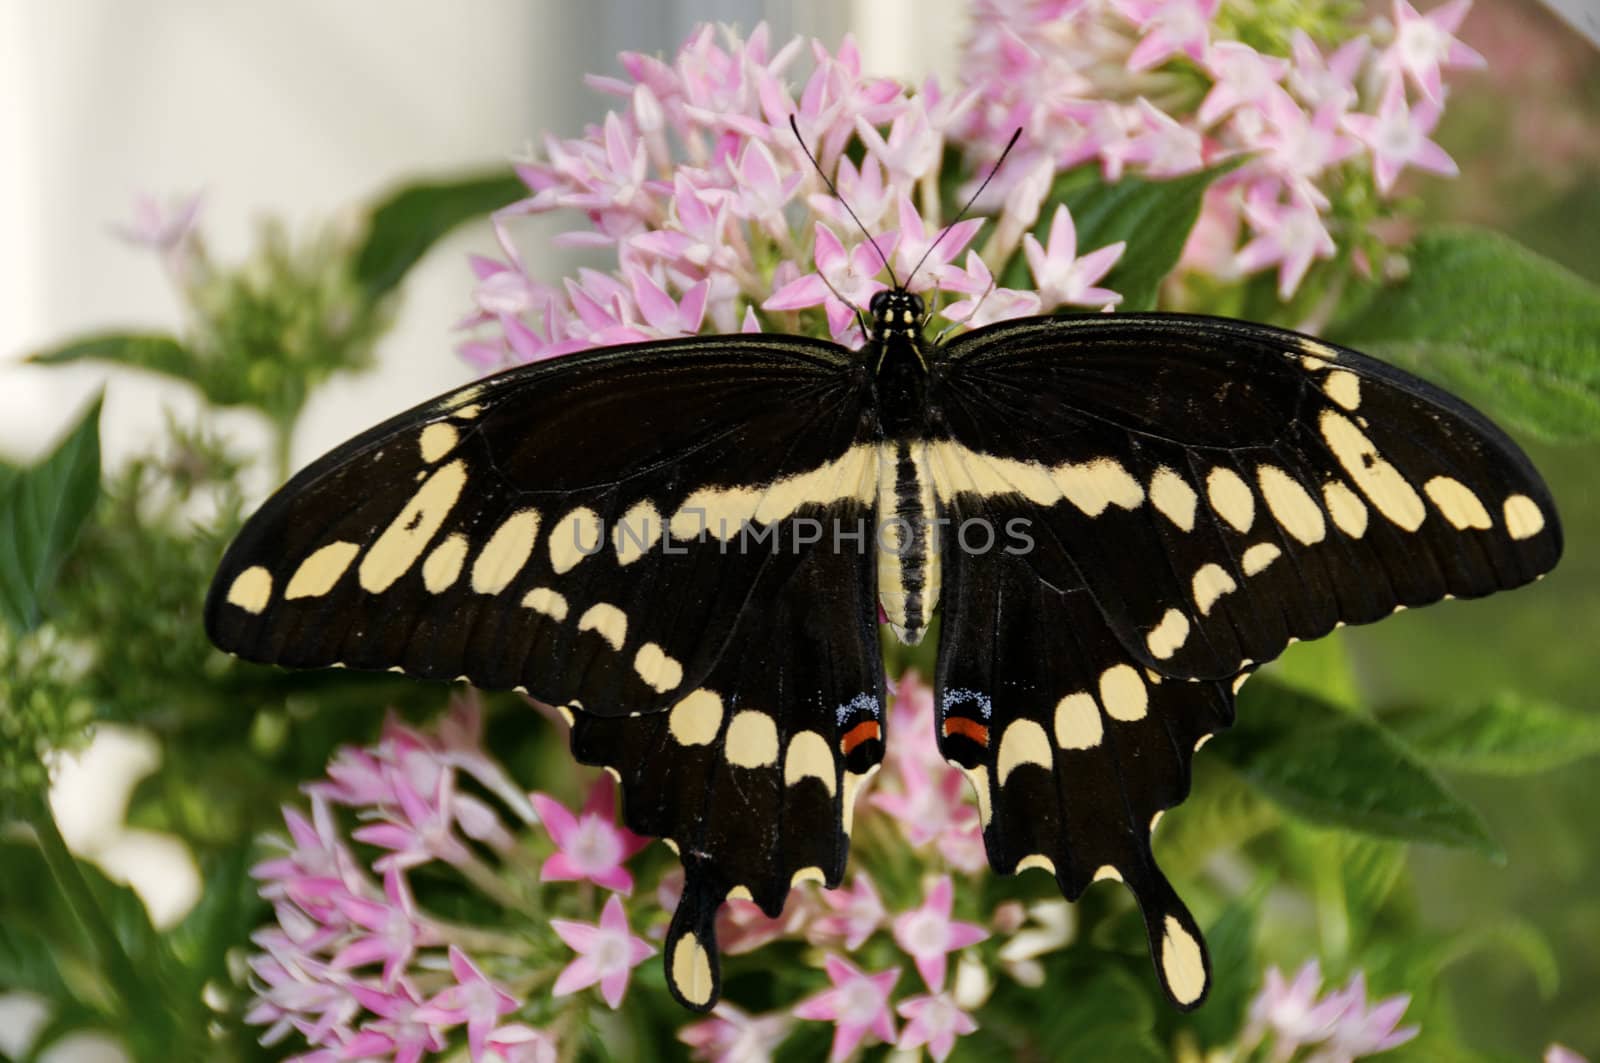 Giant Swallowtail on Pink Flowers by wayneandrose